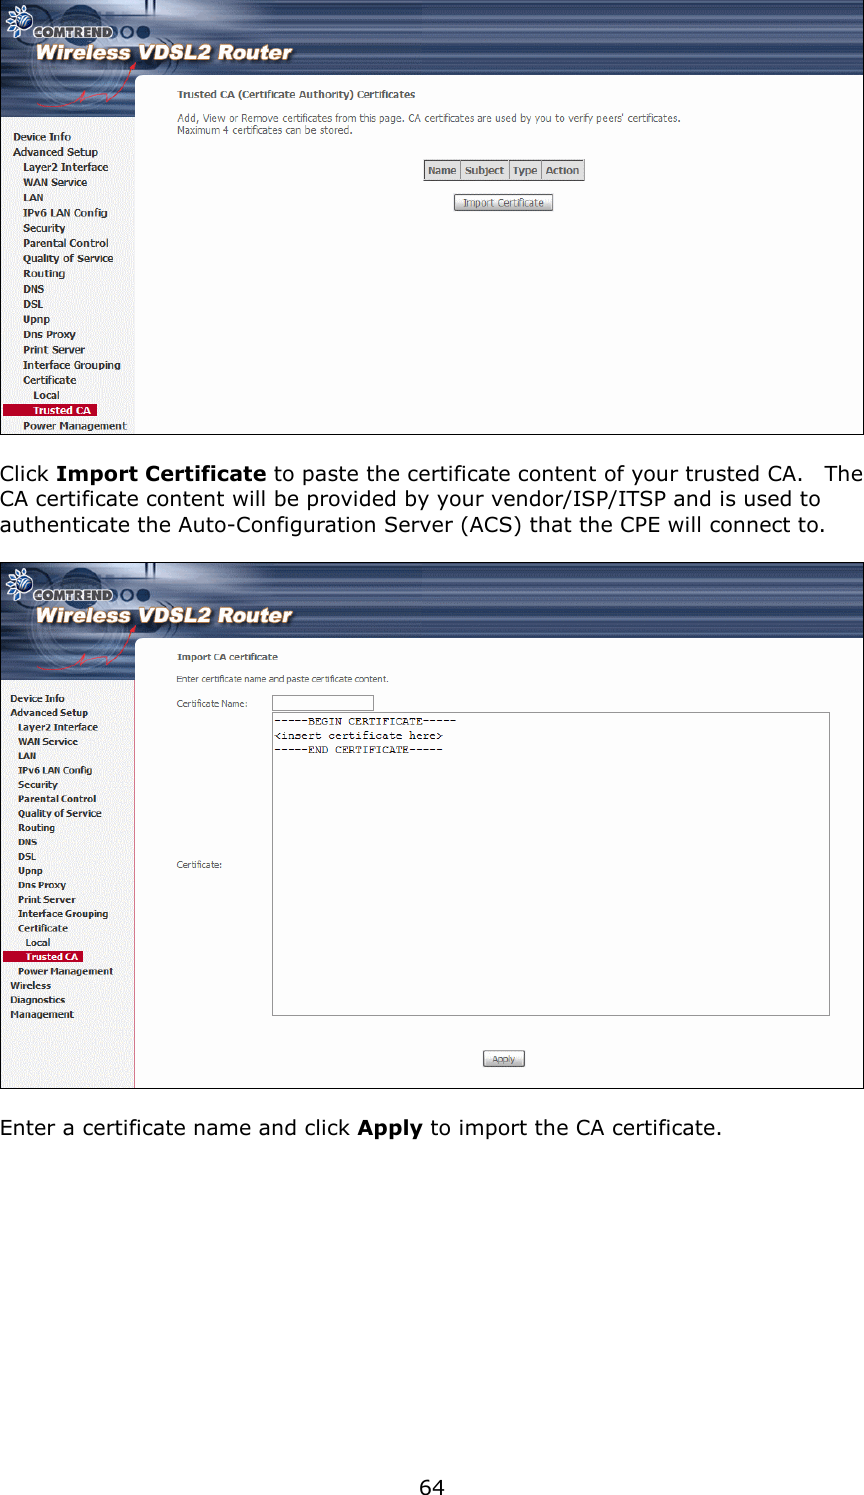   64   Click Import Certificate to paste the certificate content of your trusted CA.    The CA certificate content will be provided by your vendor/ISP/ITSP and is used to authenticate the Auto-Configuration Server (ACS) that the CPE will connect to.    Enter a certificate name and click Apply to import the CA certificate. 